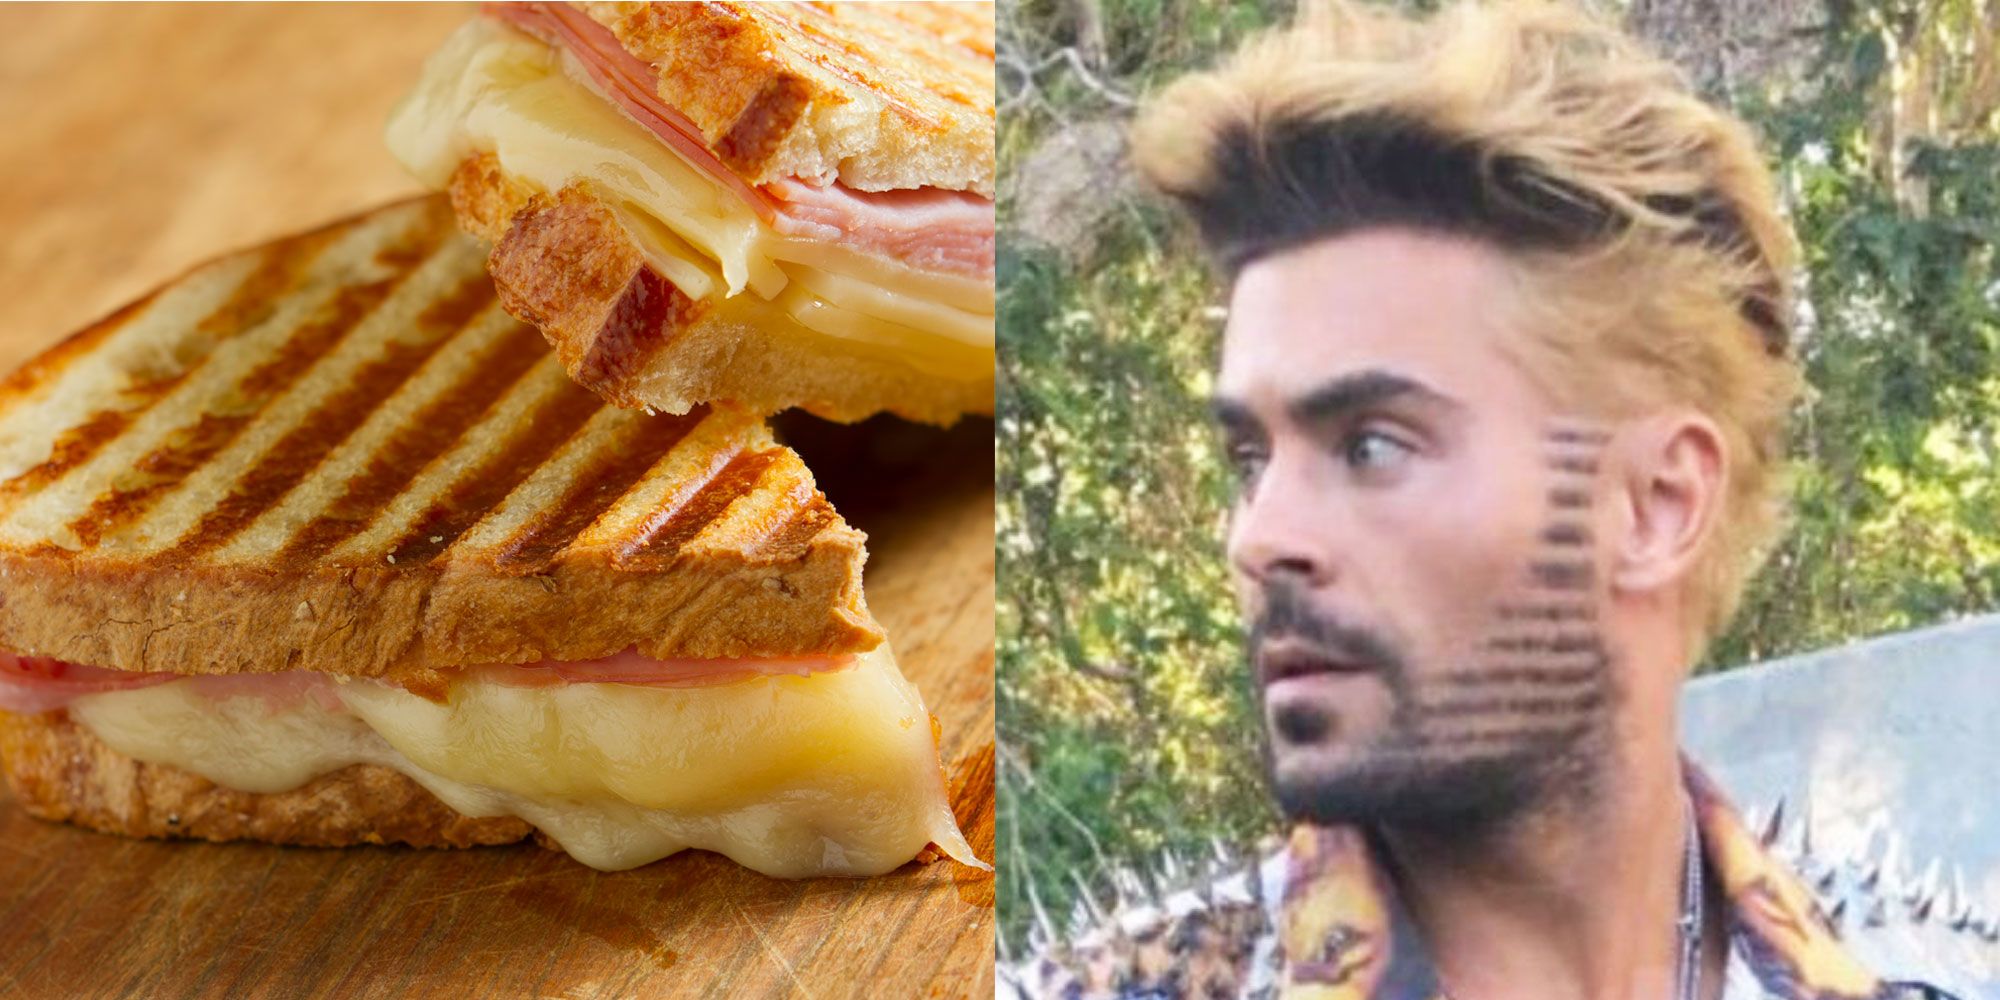 Zac Efron's New Haircut Was Literally Inspired By A Panini